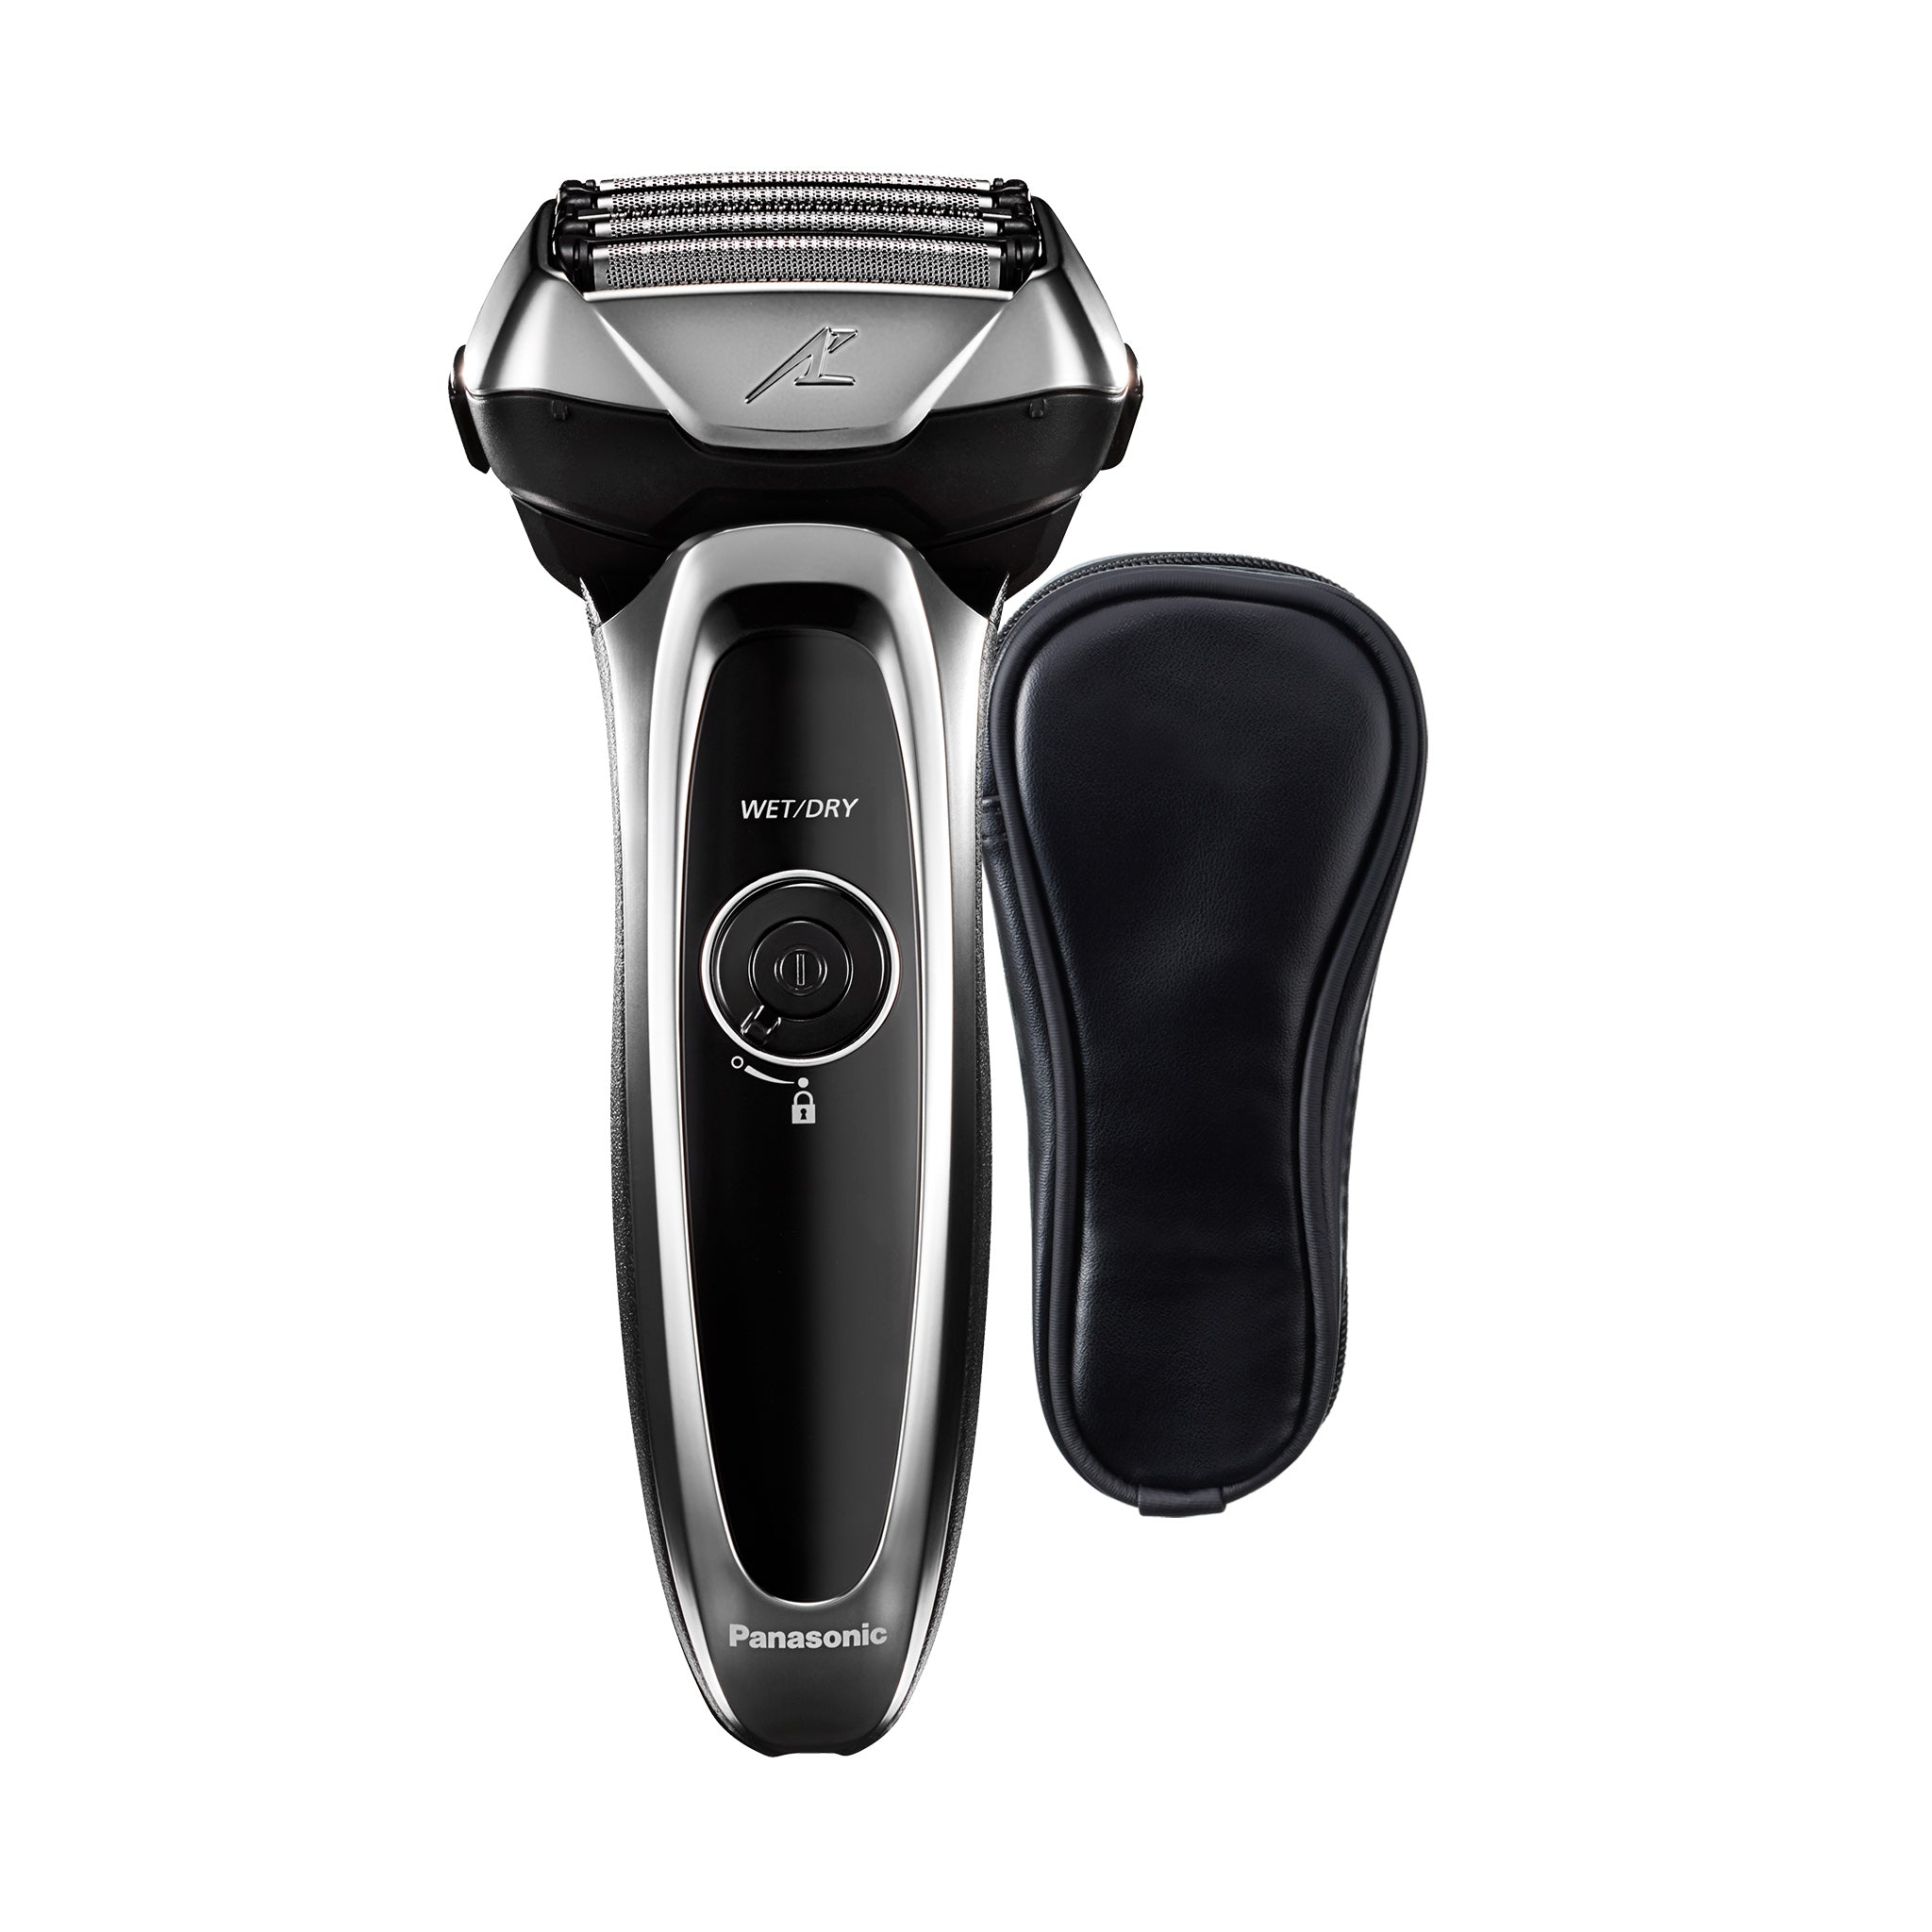 Panasonic 3-Blade Women's Electric Shaver with Pop-Up Trimmer - ES 